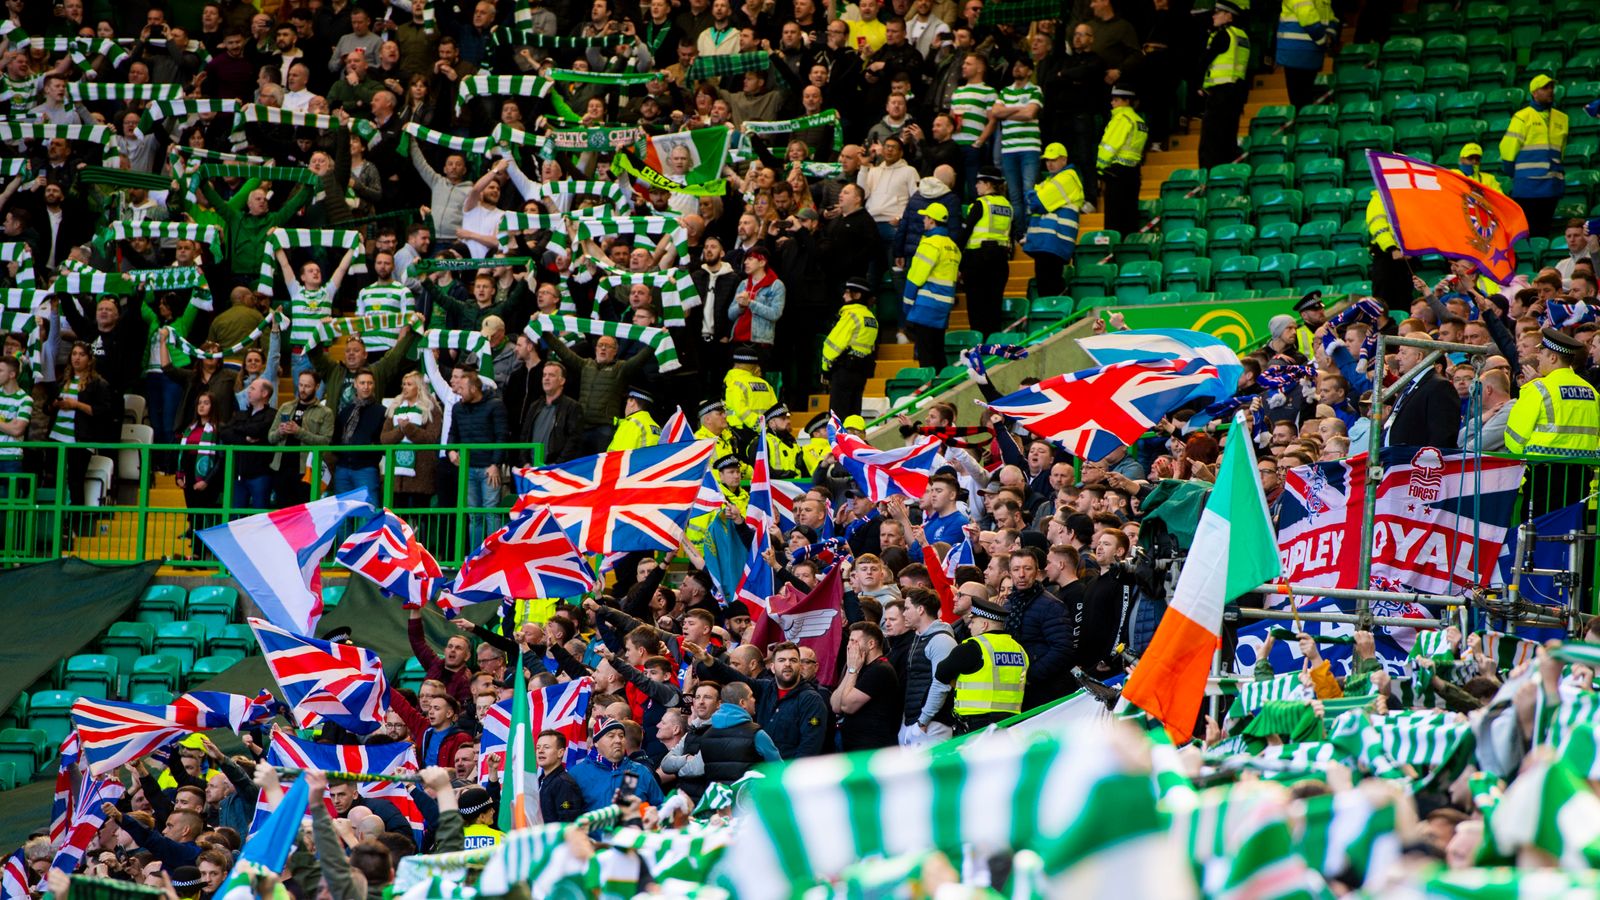 Three people stabbed in Glasgow after Celtic vs Rangers match